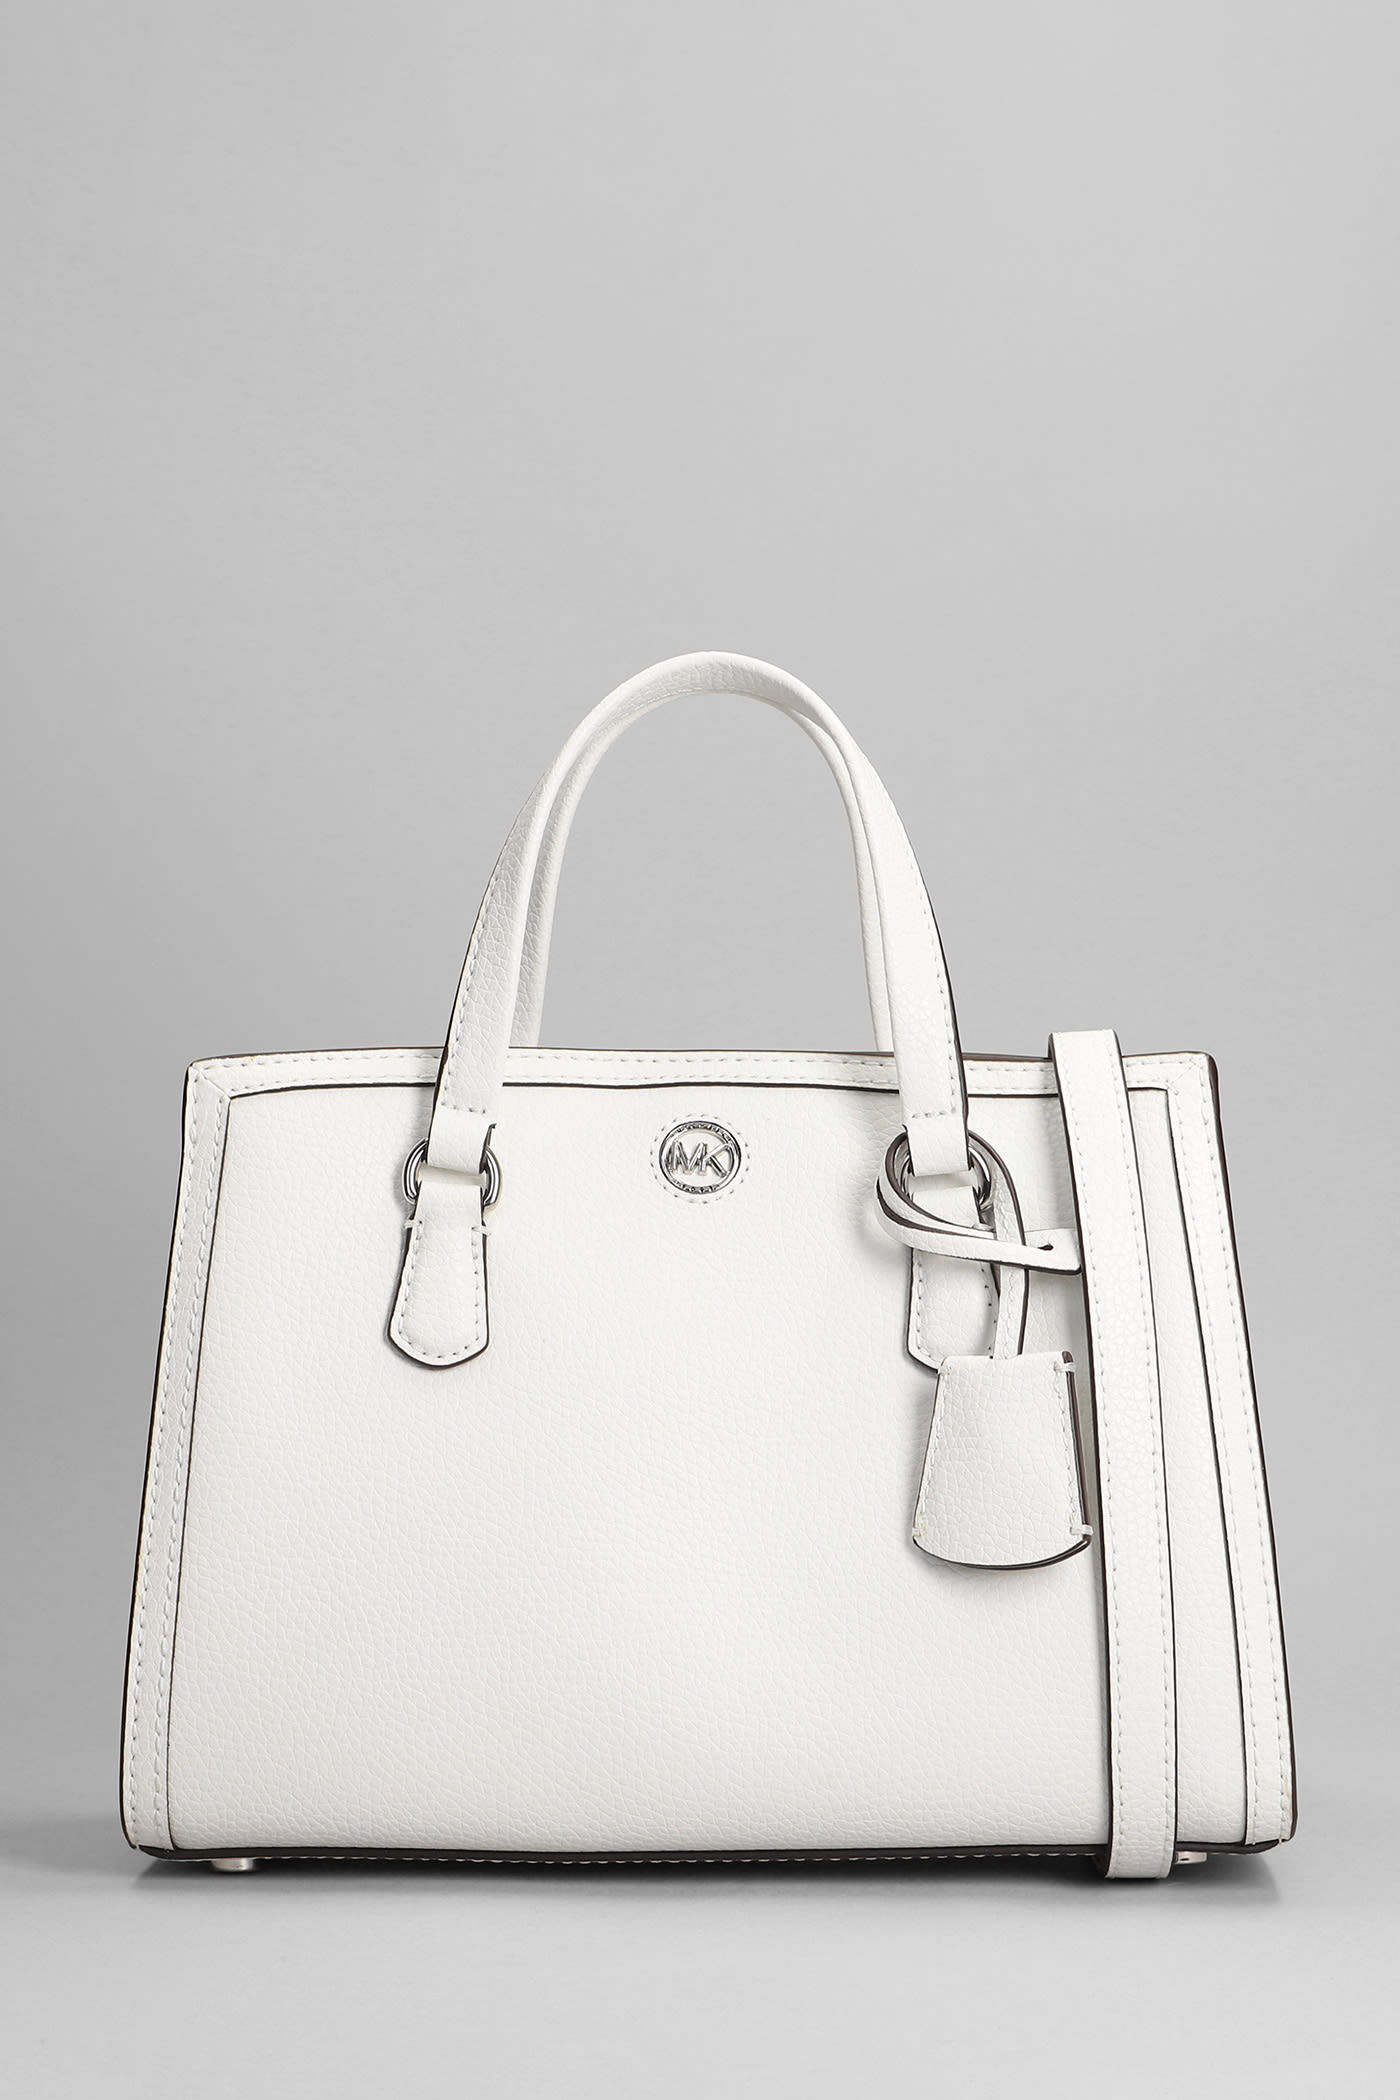 Michael Kors Chantal Hand Bag In White Leather